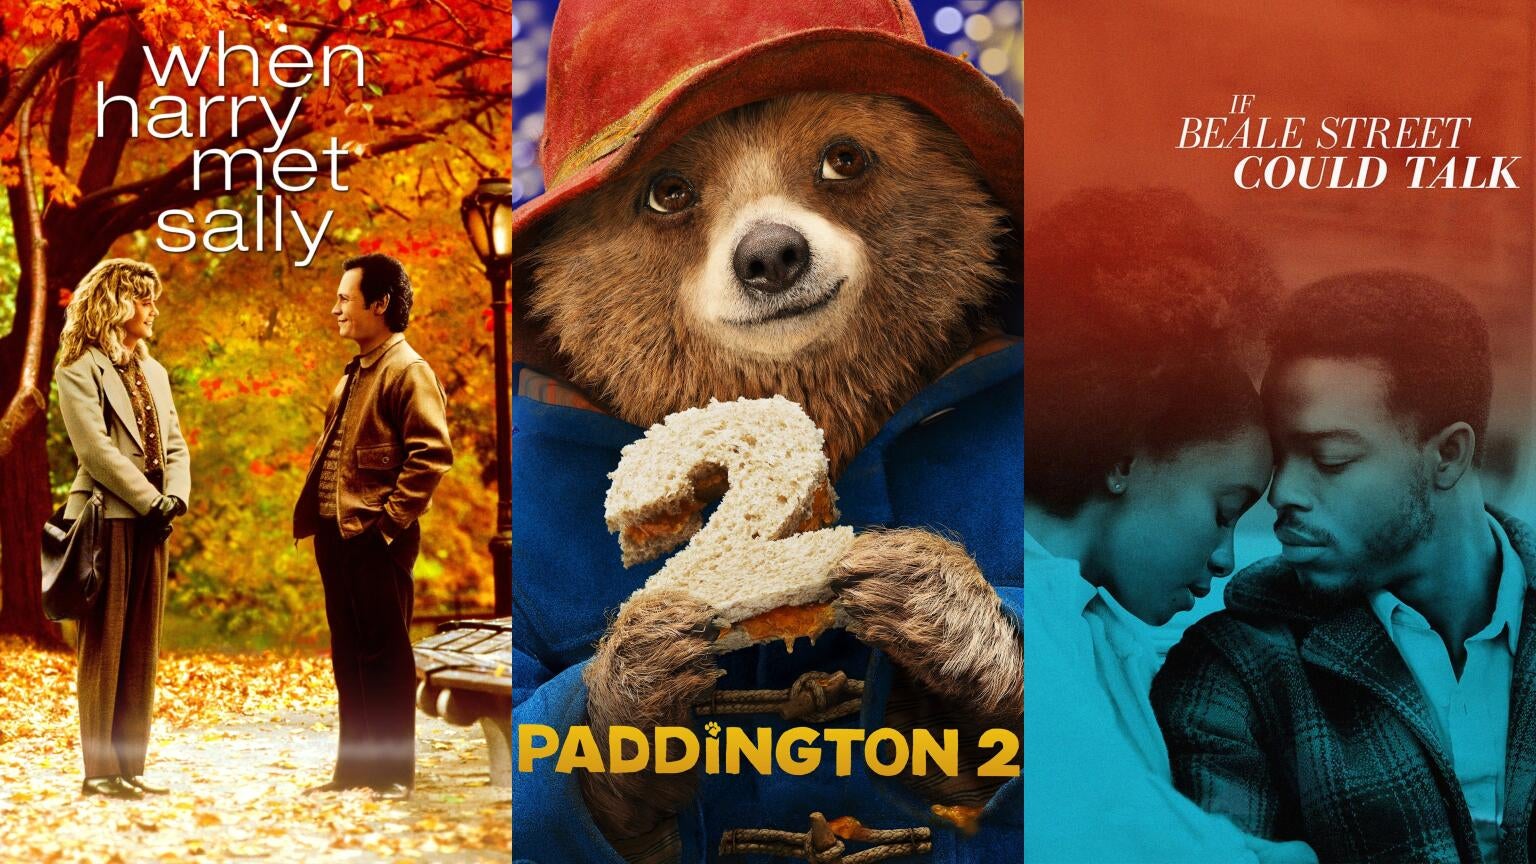 Movie posters for "When Harry Met Sally," "Paddington 2," and "If Beale Street Could Talk"